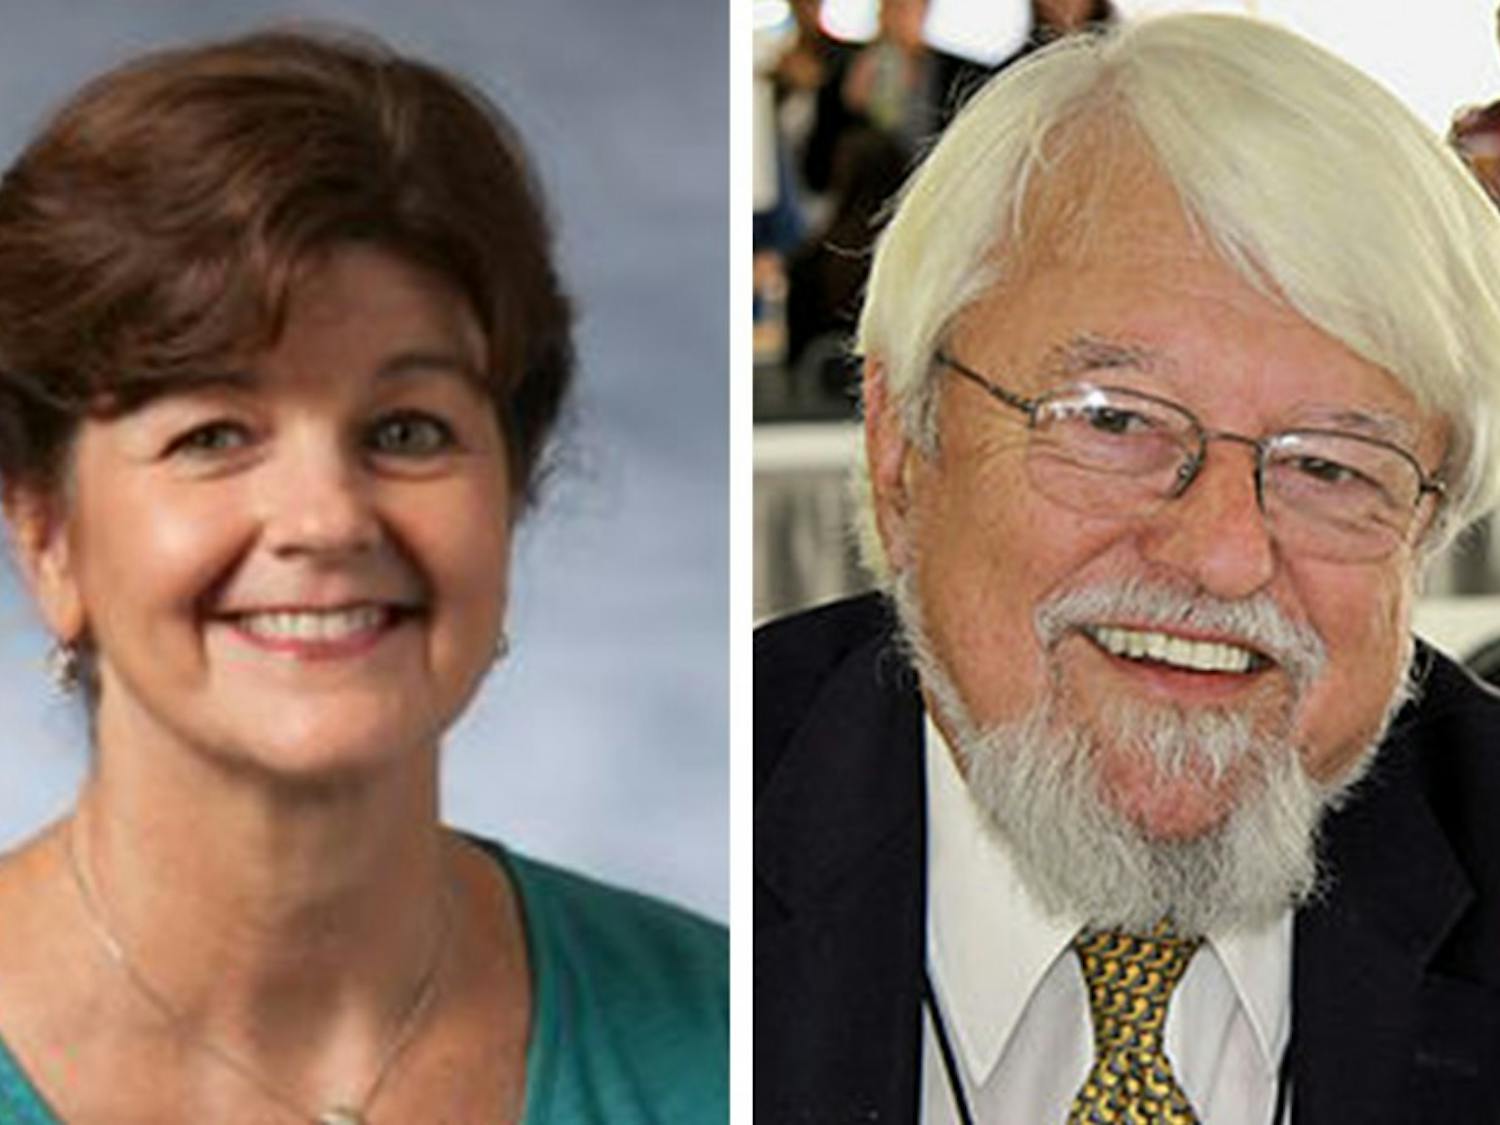 Nancy MacLean (left) and&nbsp;William Chafe (right) both hold endowed professorships in history.&nbsp;